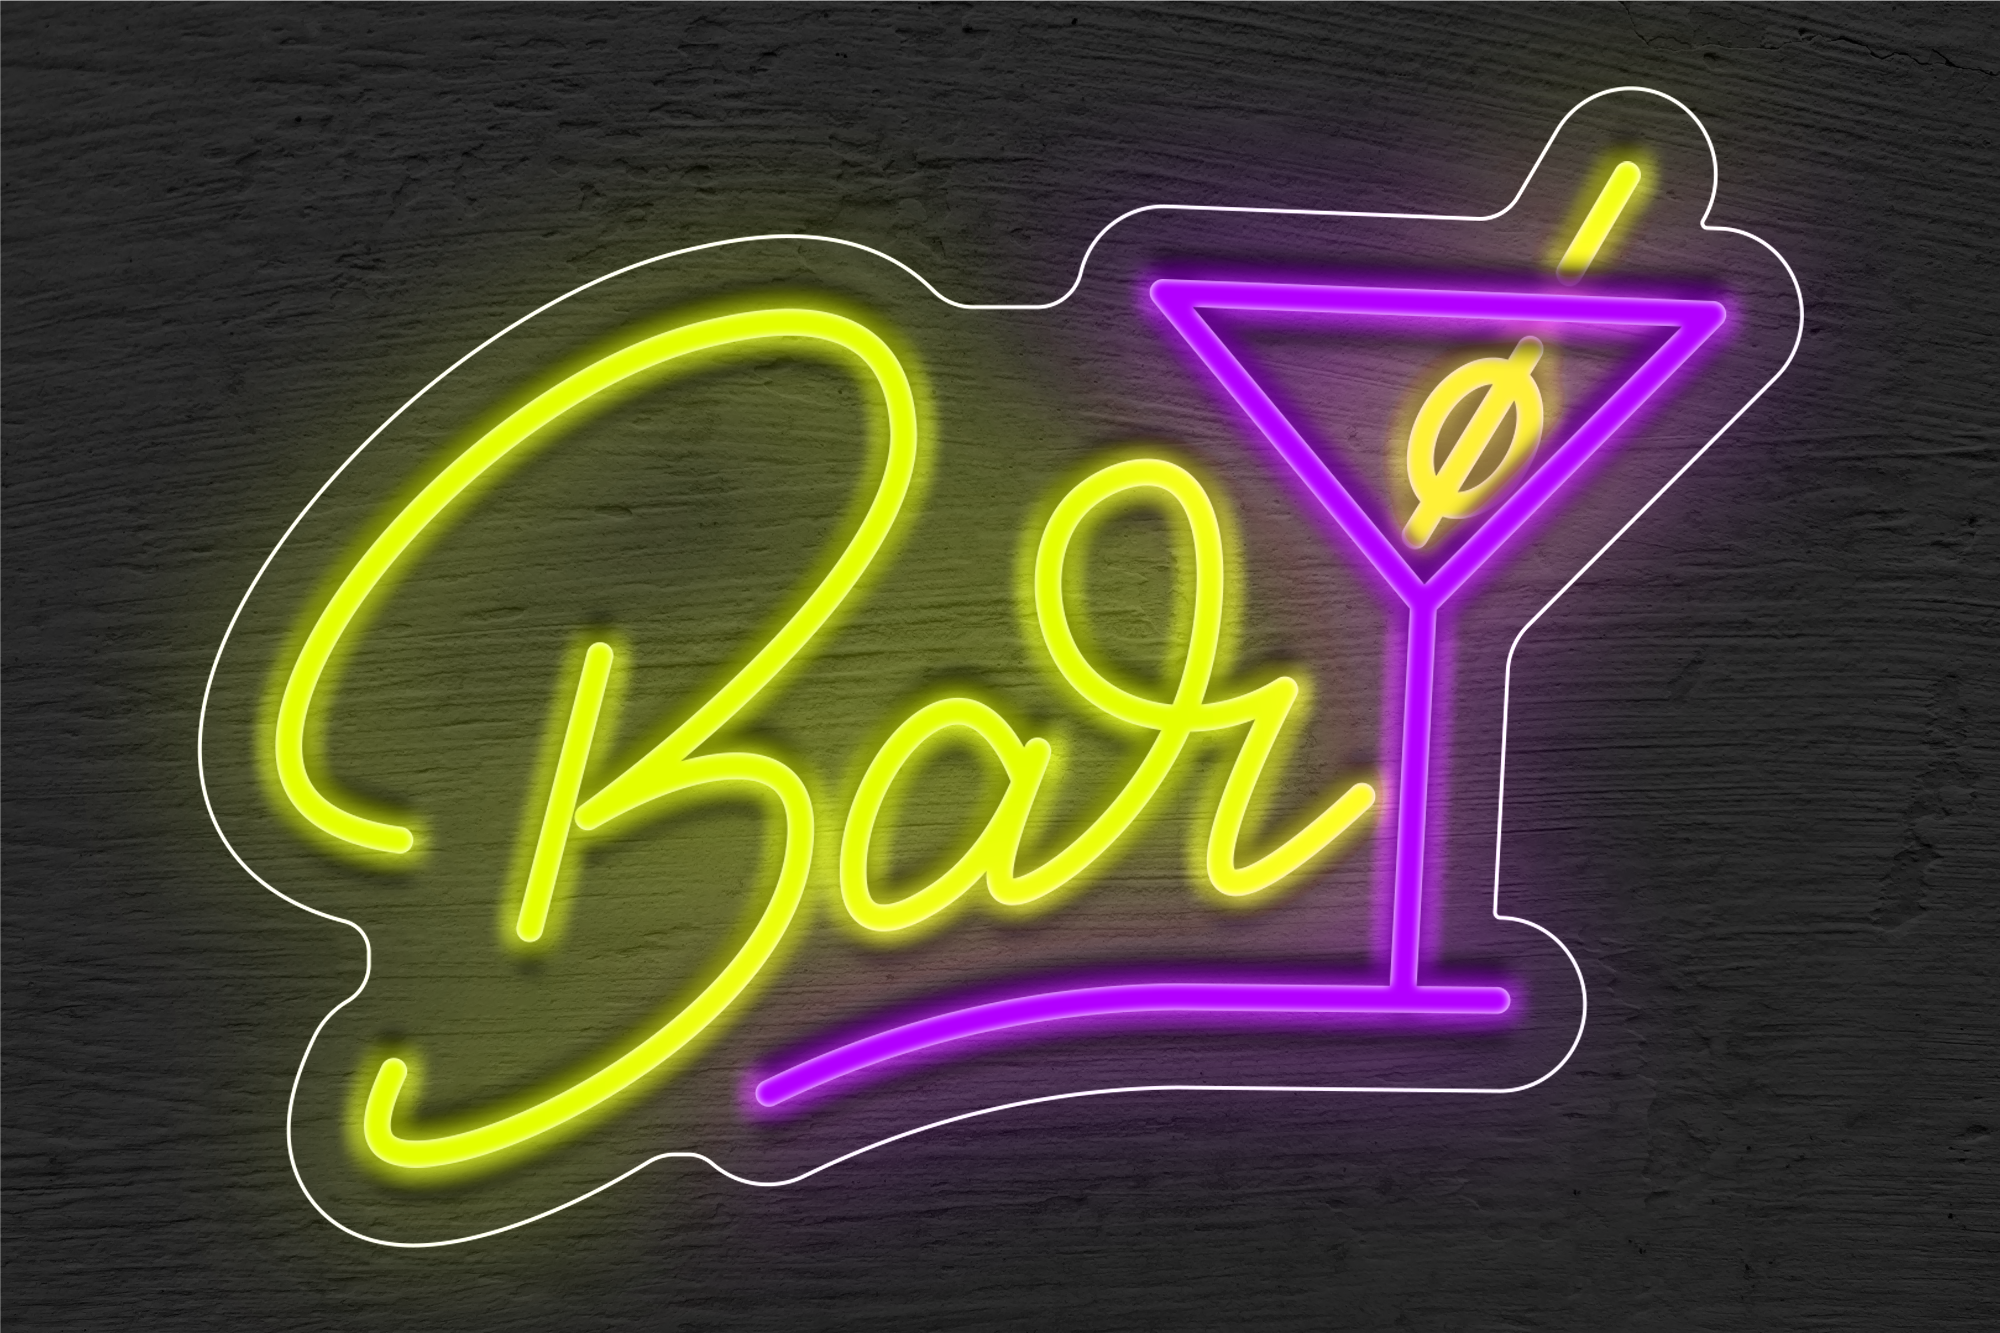 "Bar" with Martini Glass LED Neon Sign